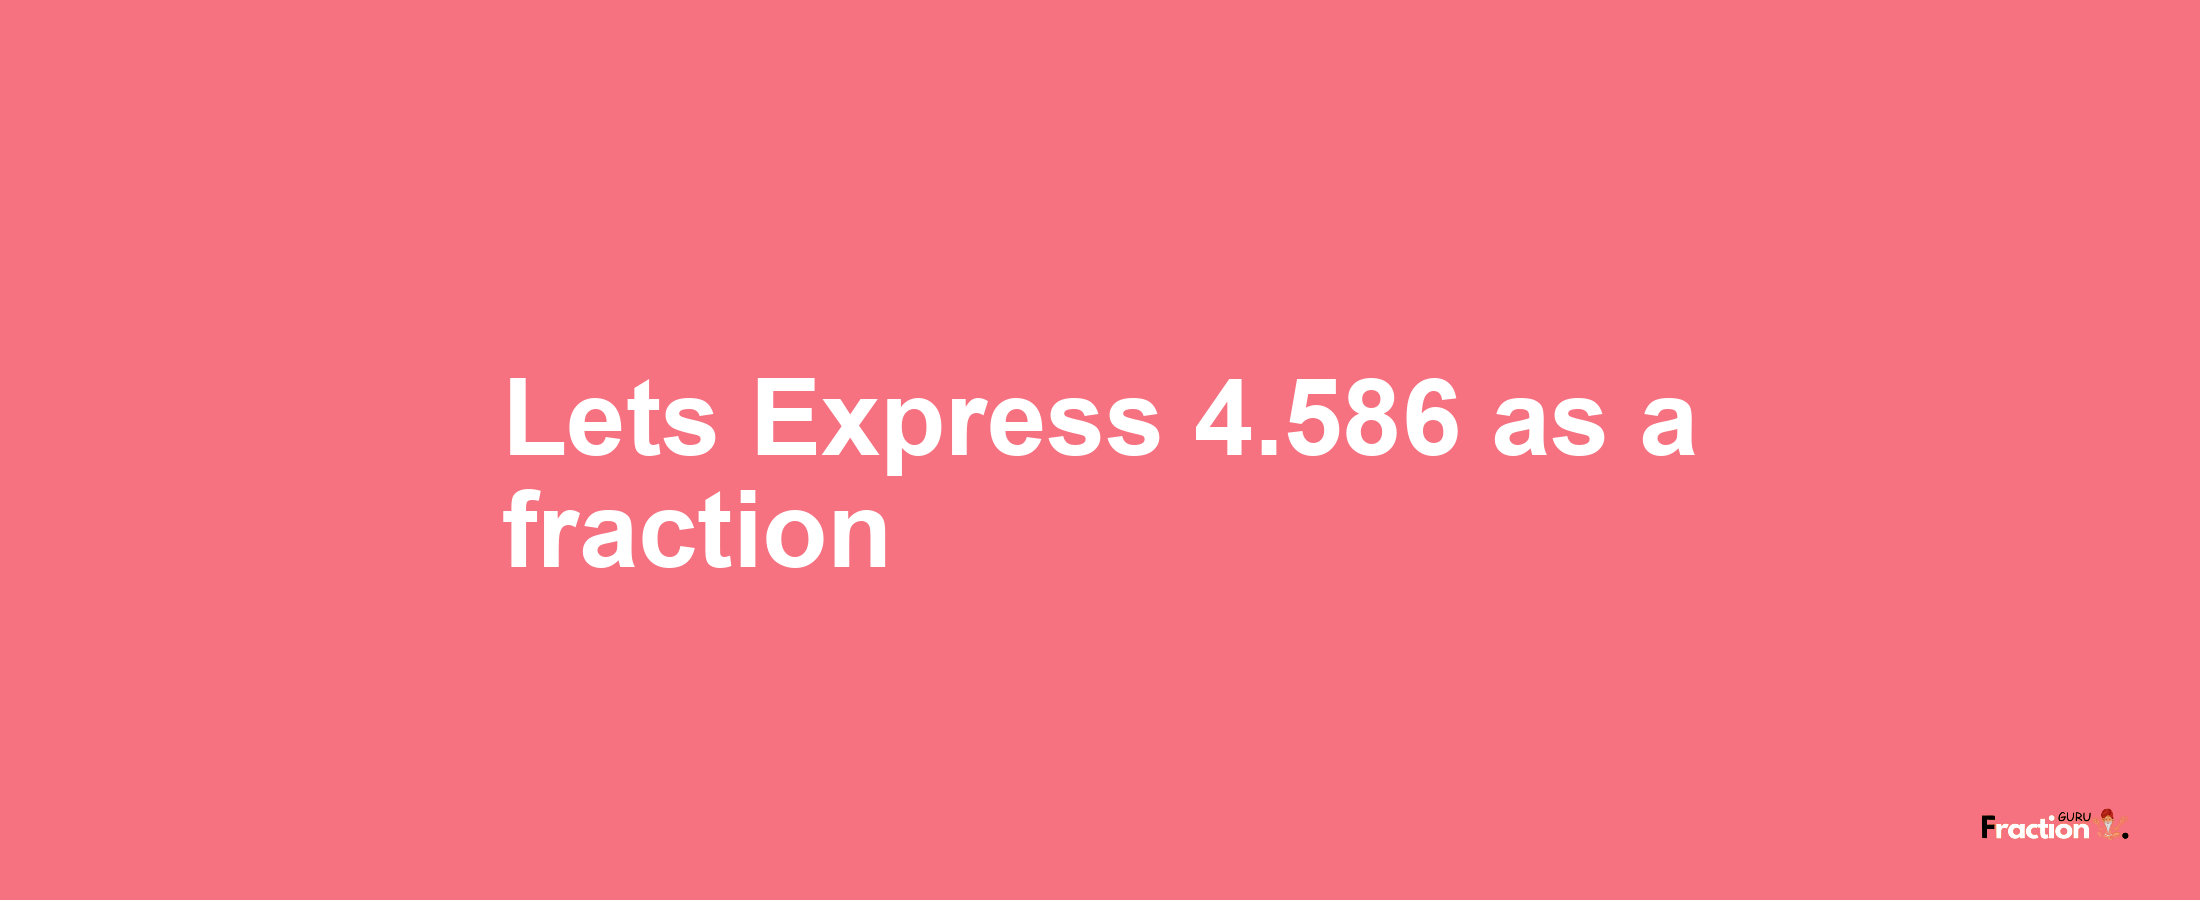 Lets Express 4.586 as afraction